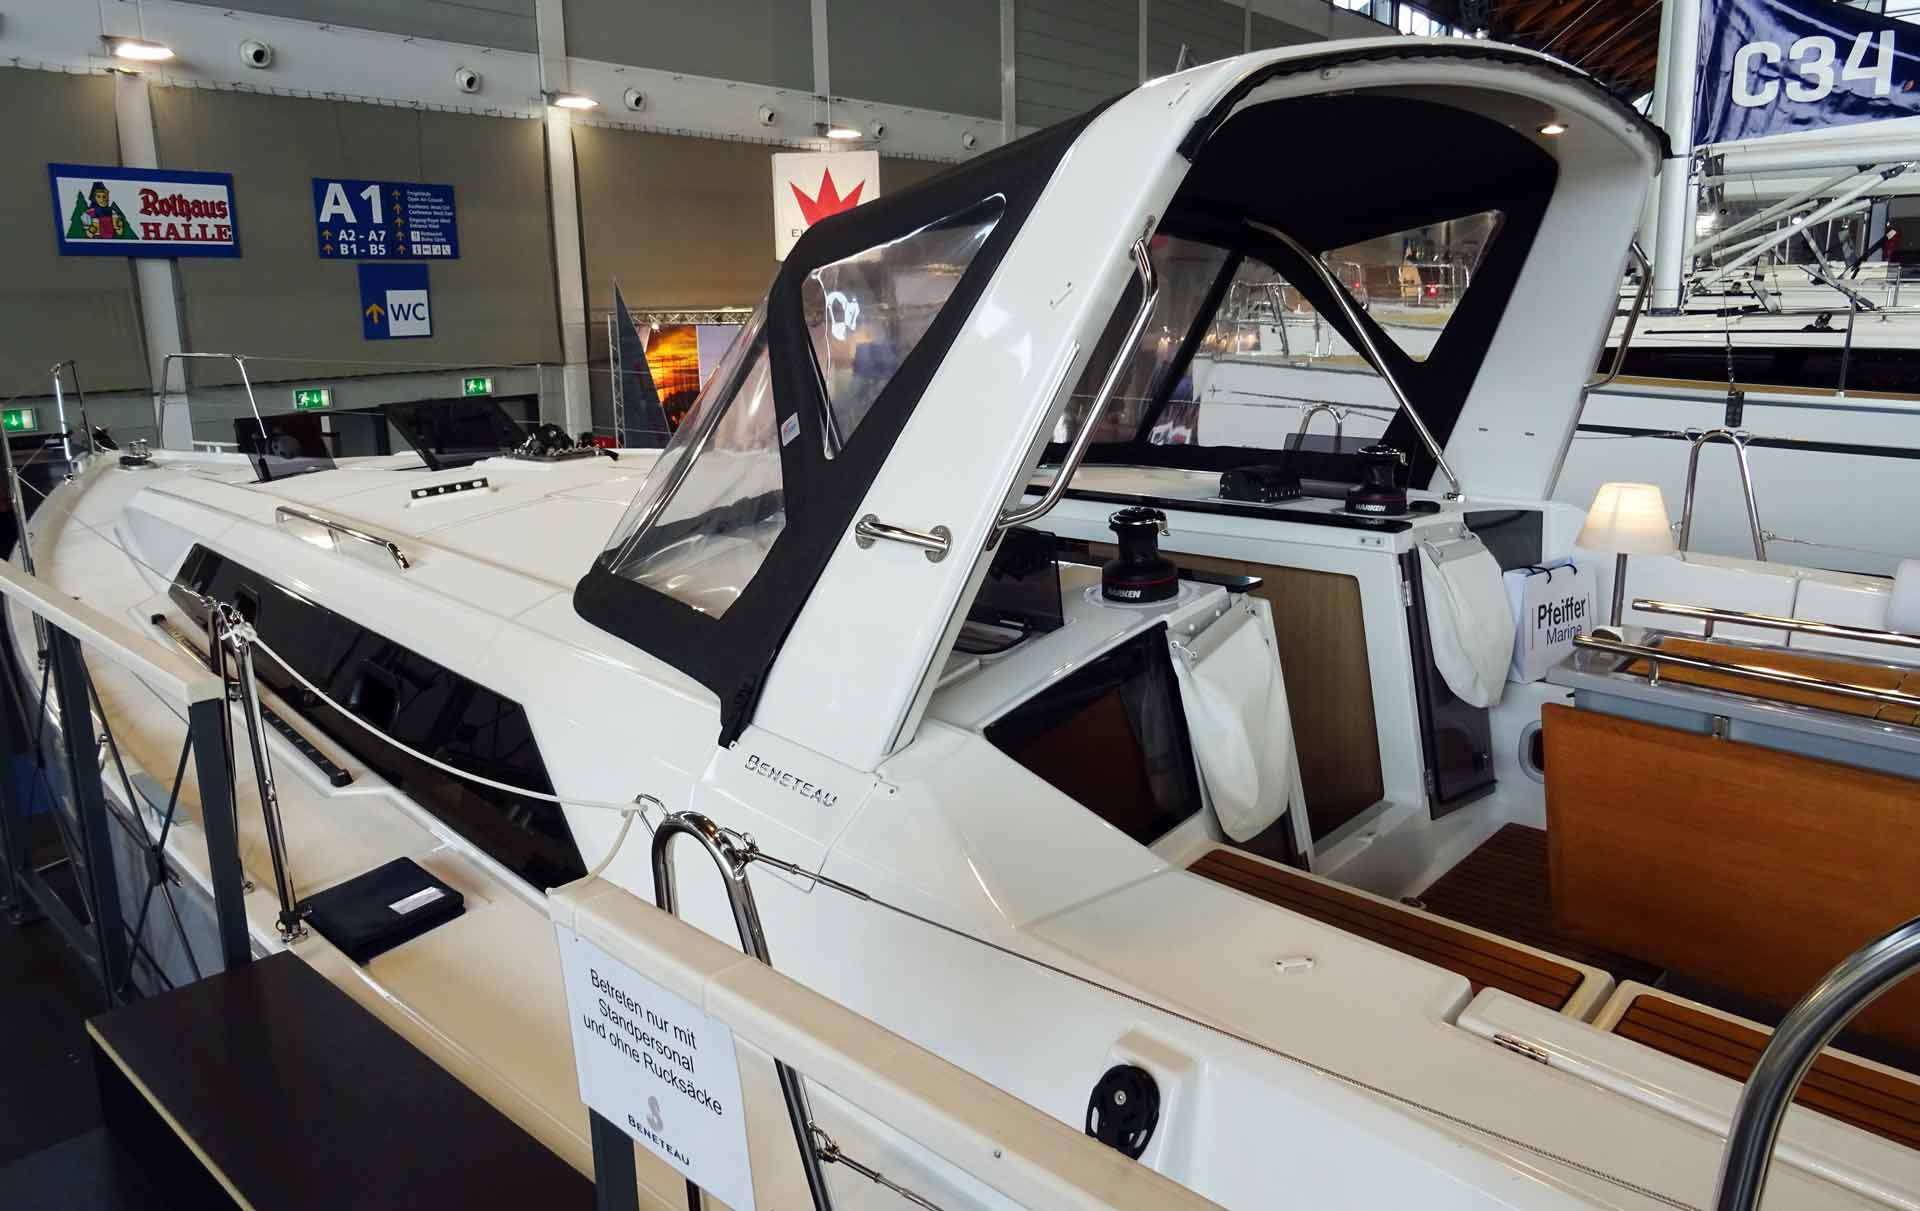 The Beneteau Oceanis 51 features a huge (and ugly) Targa Bar